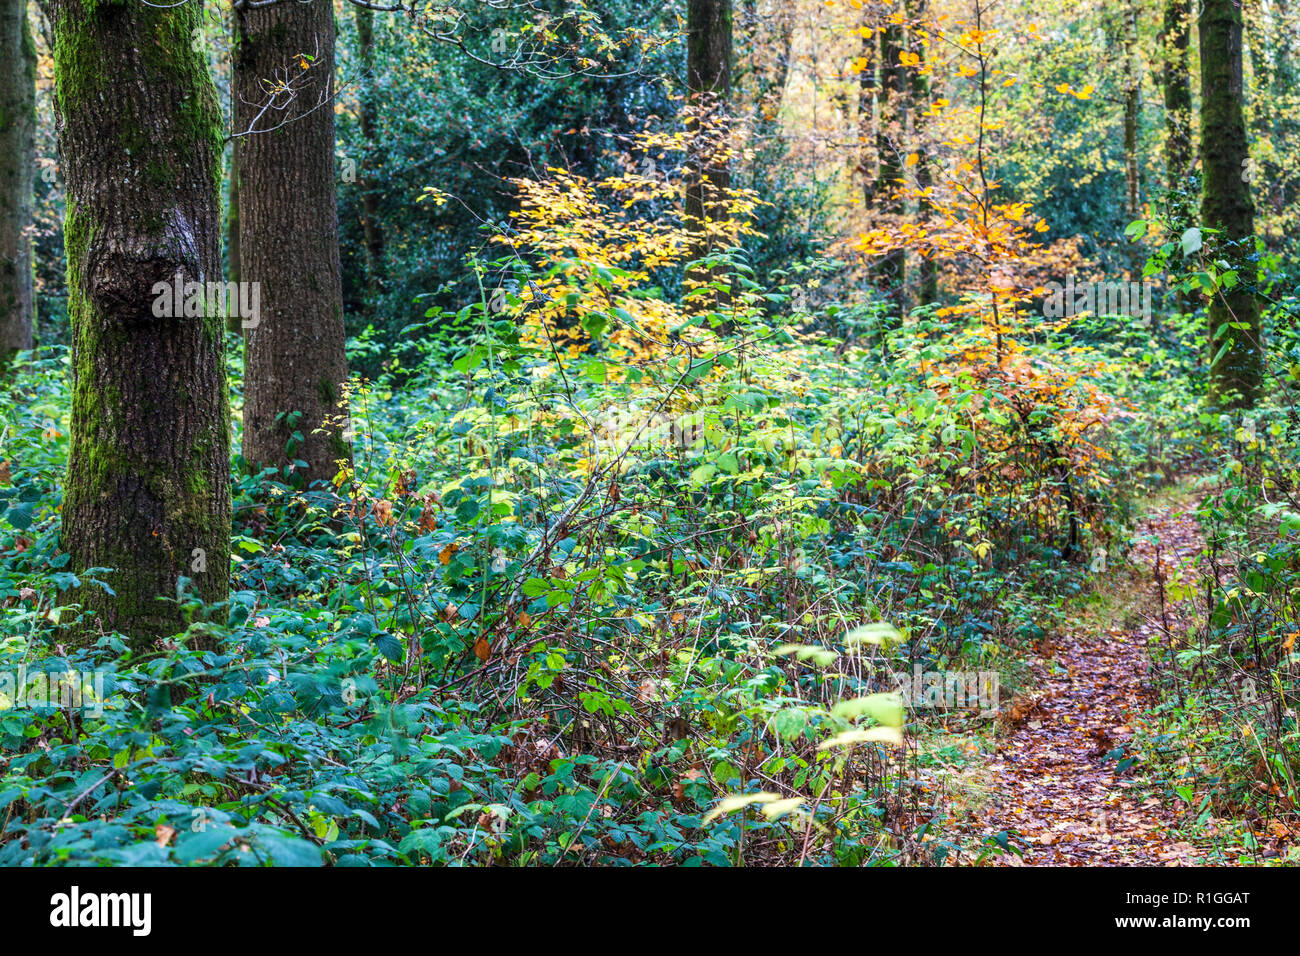 Autumn in the Savernake Forest in Wiltshire. Stock Photo